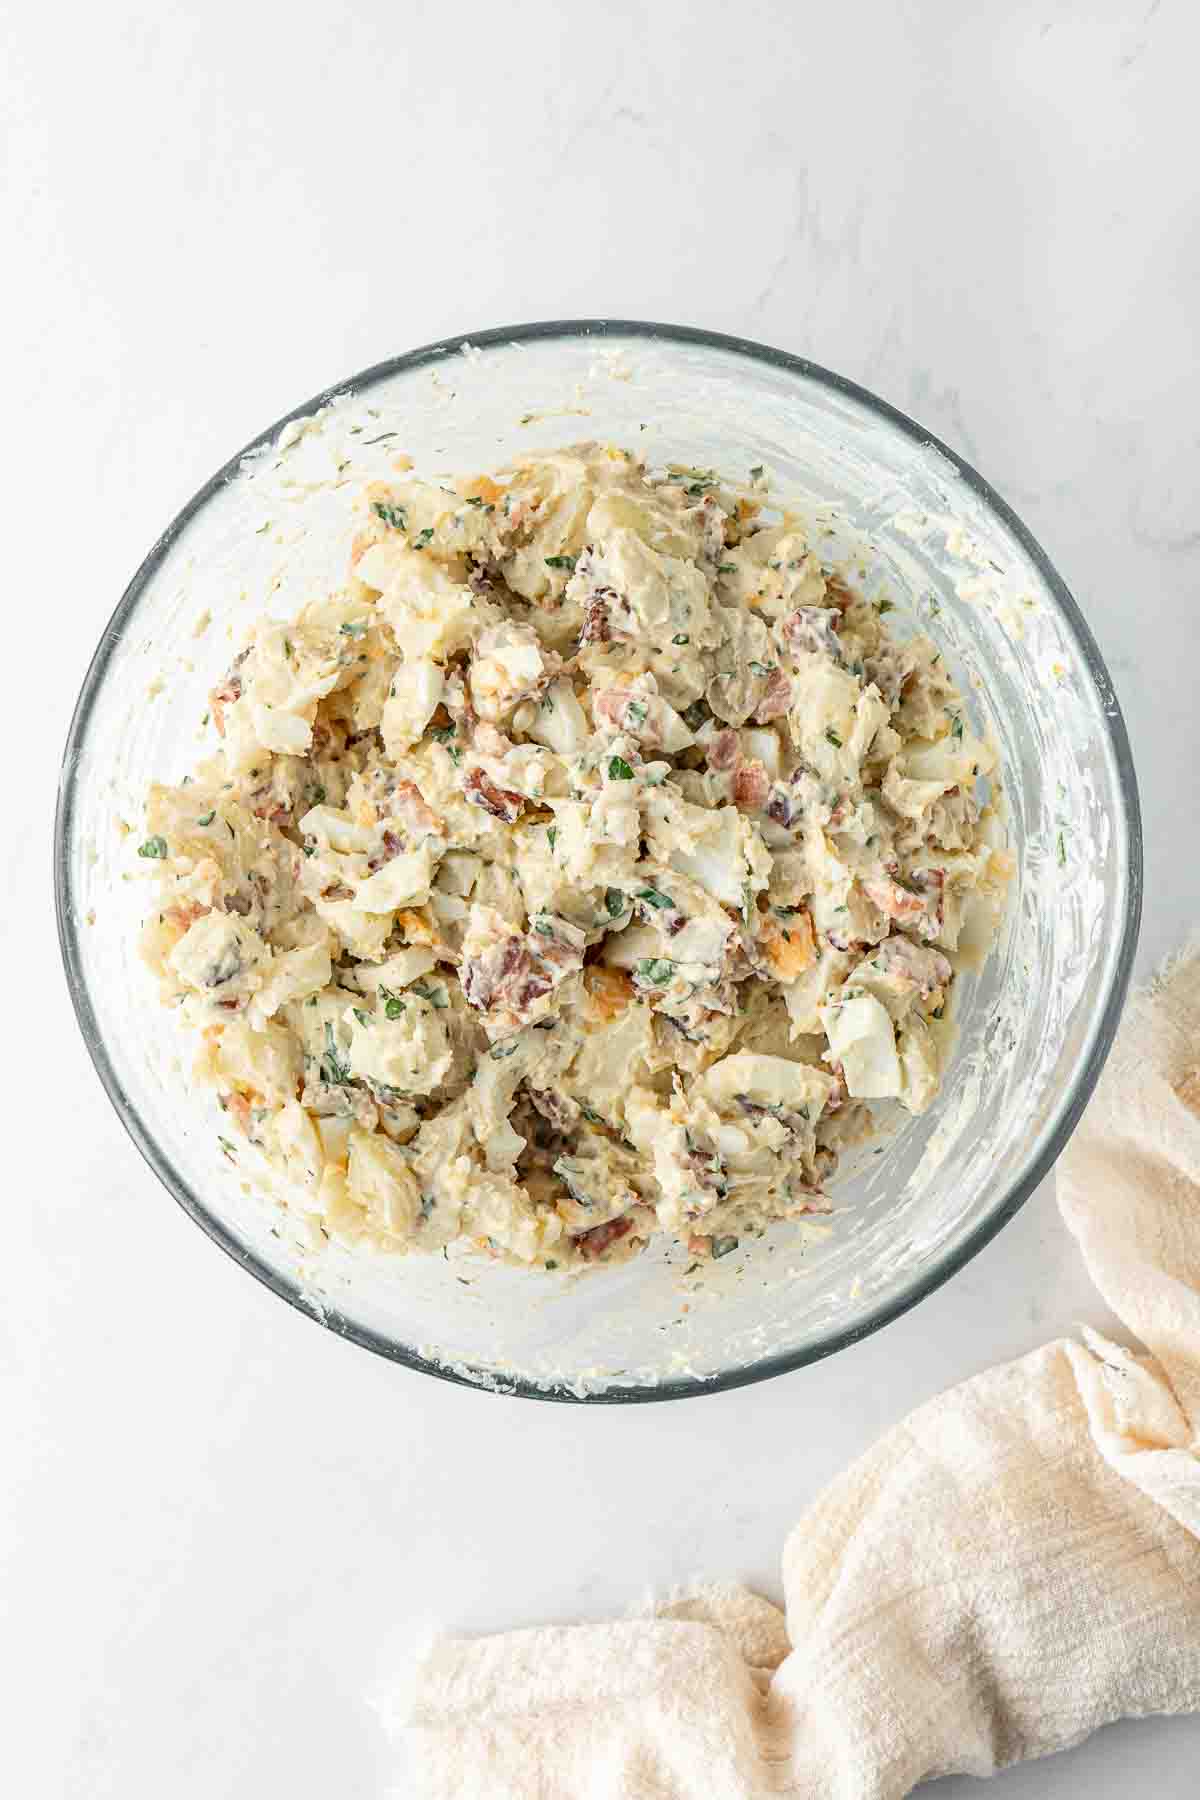 Dairy free potato salad mixed up in a glass bowl, ready to serve.